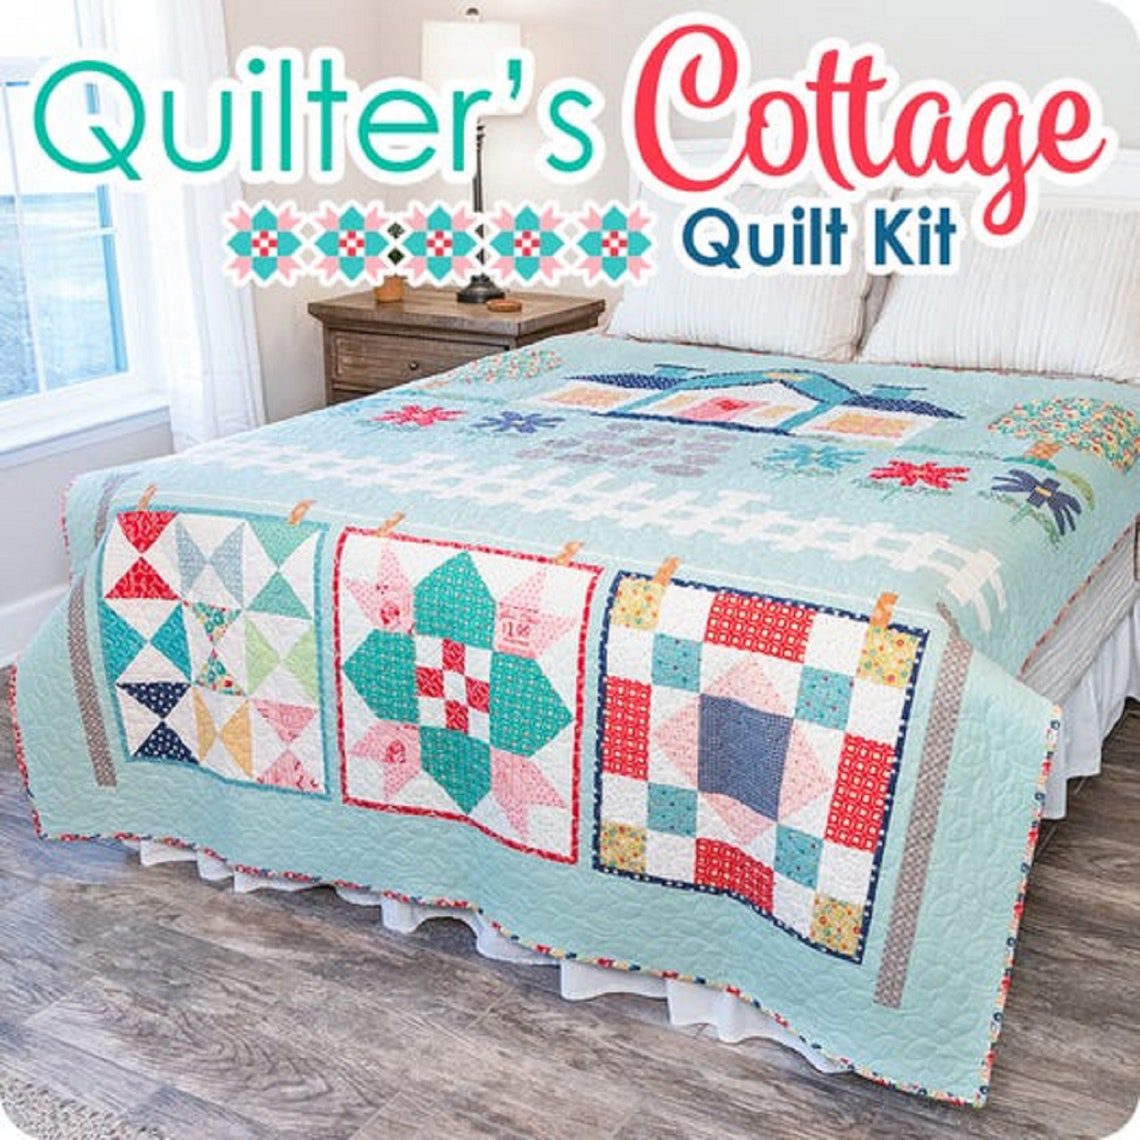 Lori Holt - Quilter's Cottage Quilt Kit - The Quilting Engineer